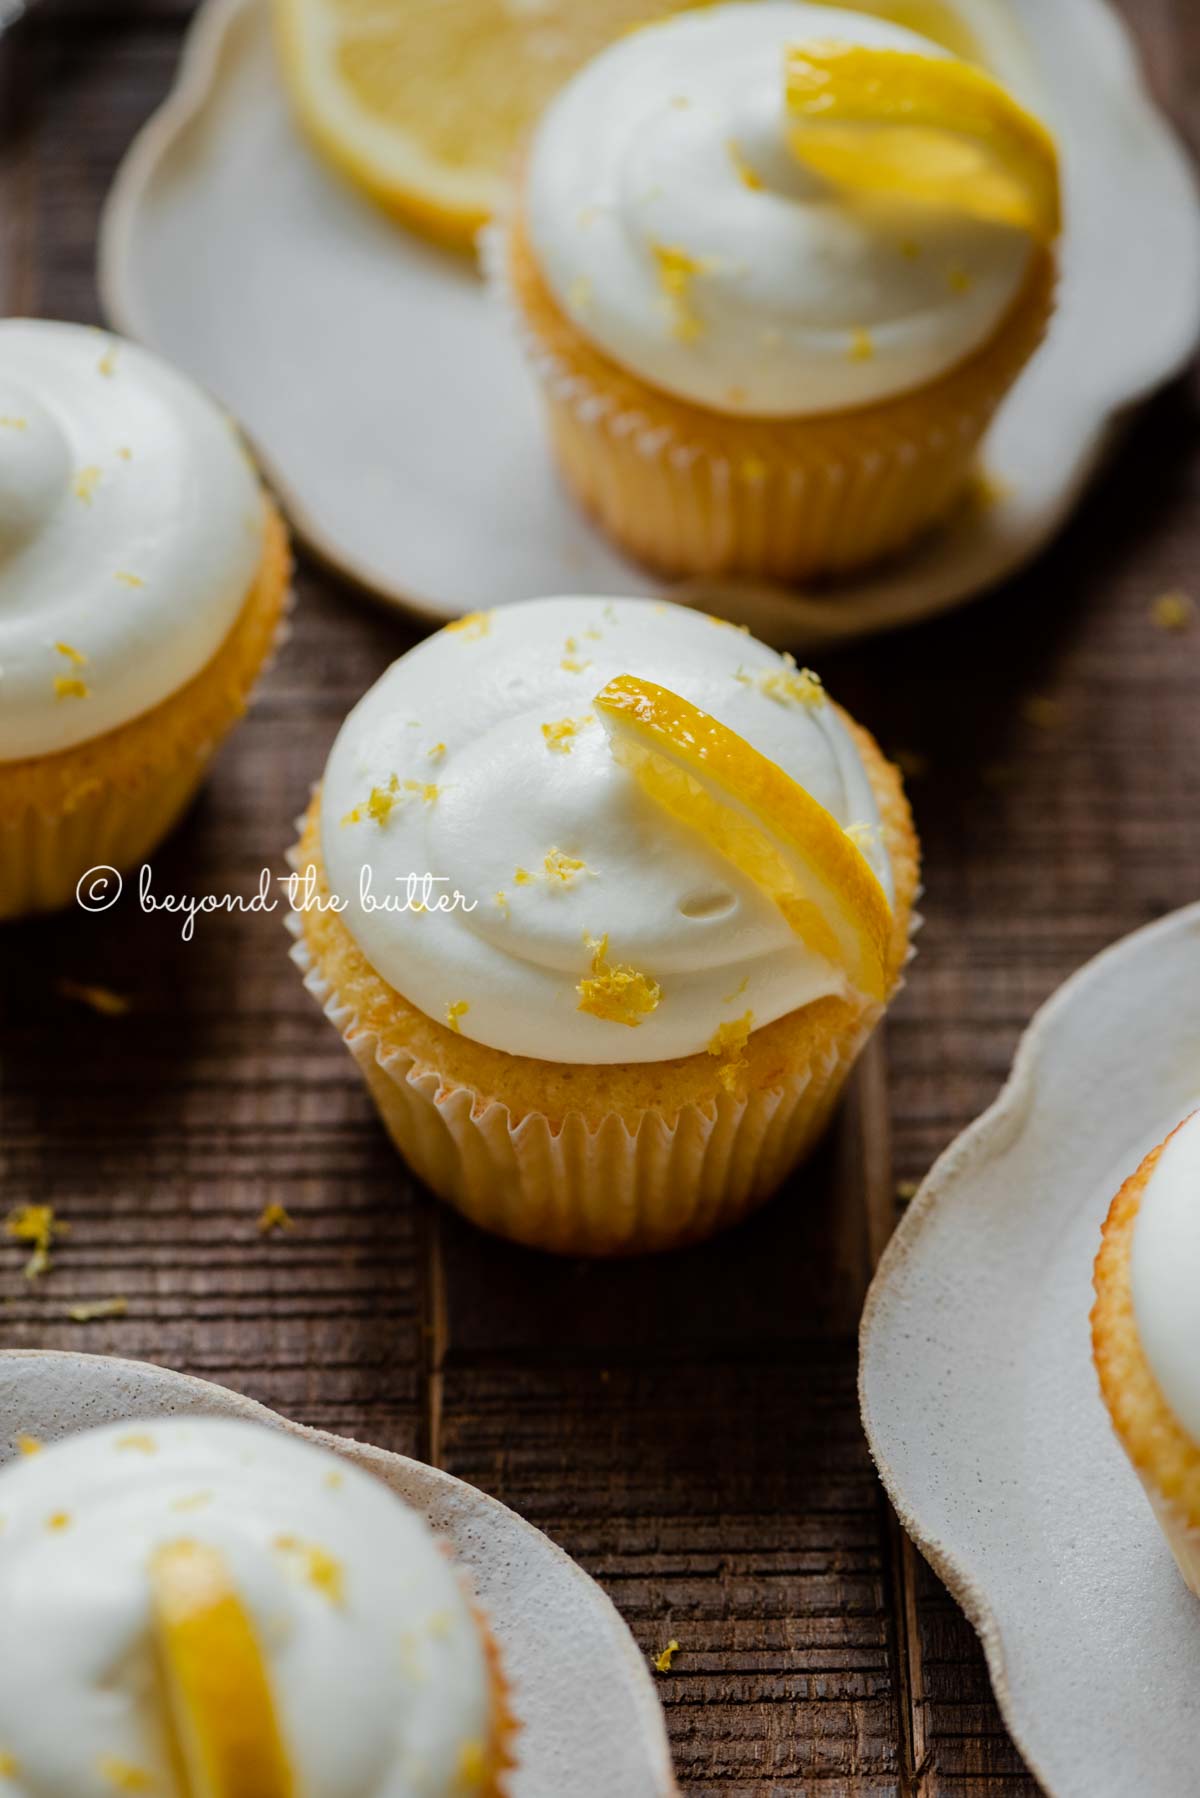 Randomly placed lemon cupcakes with lemon cream cheese frosting, garnished with lemon triangles with a small bowl of lemon zest on a dark wood background | All Images © Beyond the Butter®